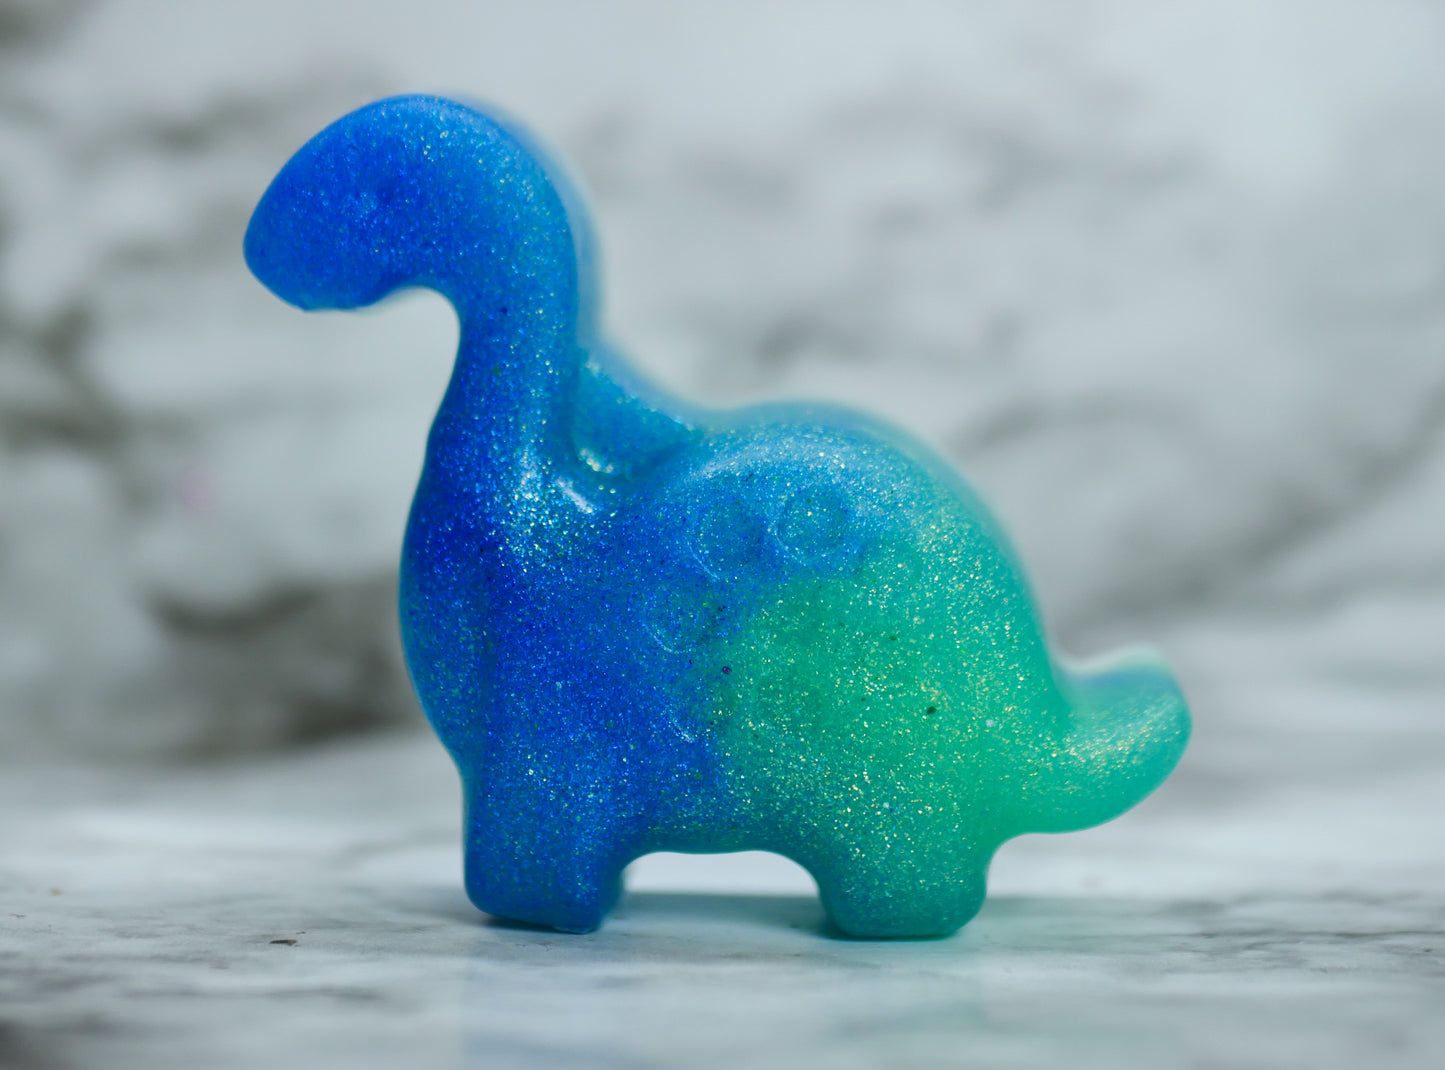 Handcrafted Glycerin Soap - Dinosaurs!